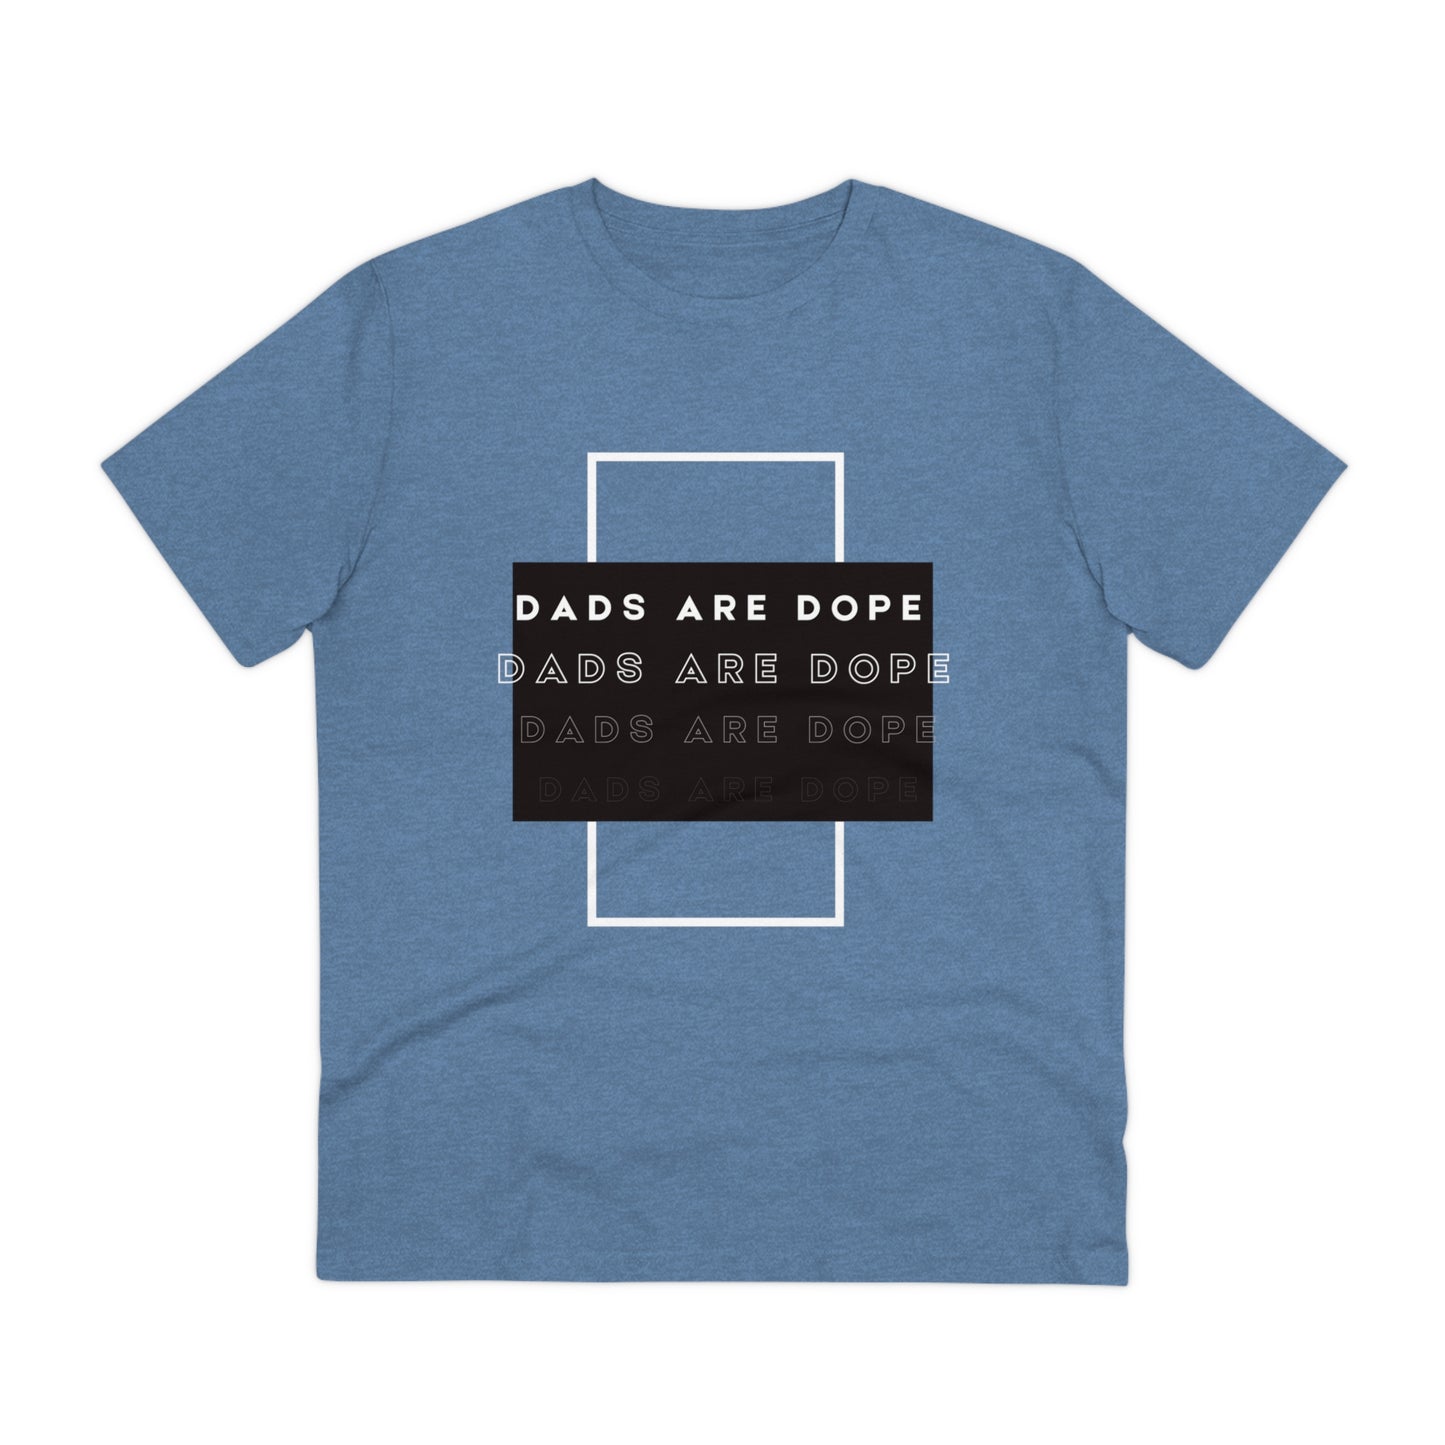 Dads are Dope Organic T-shirt Unisex